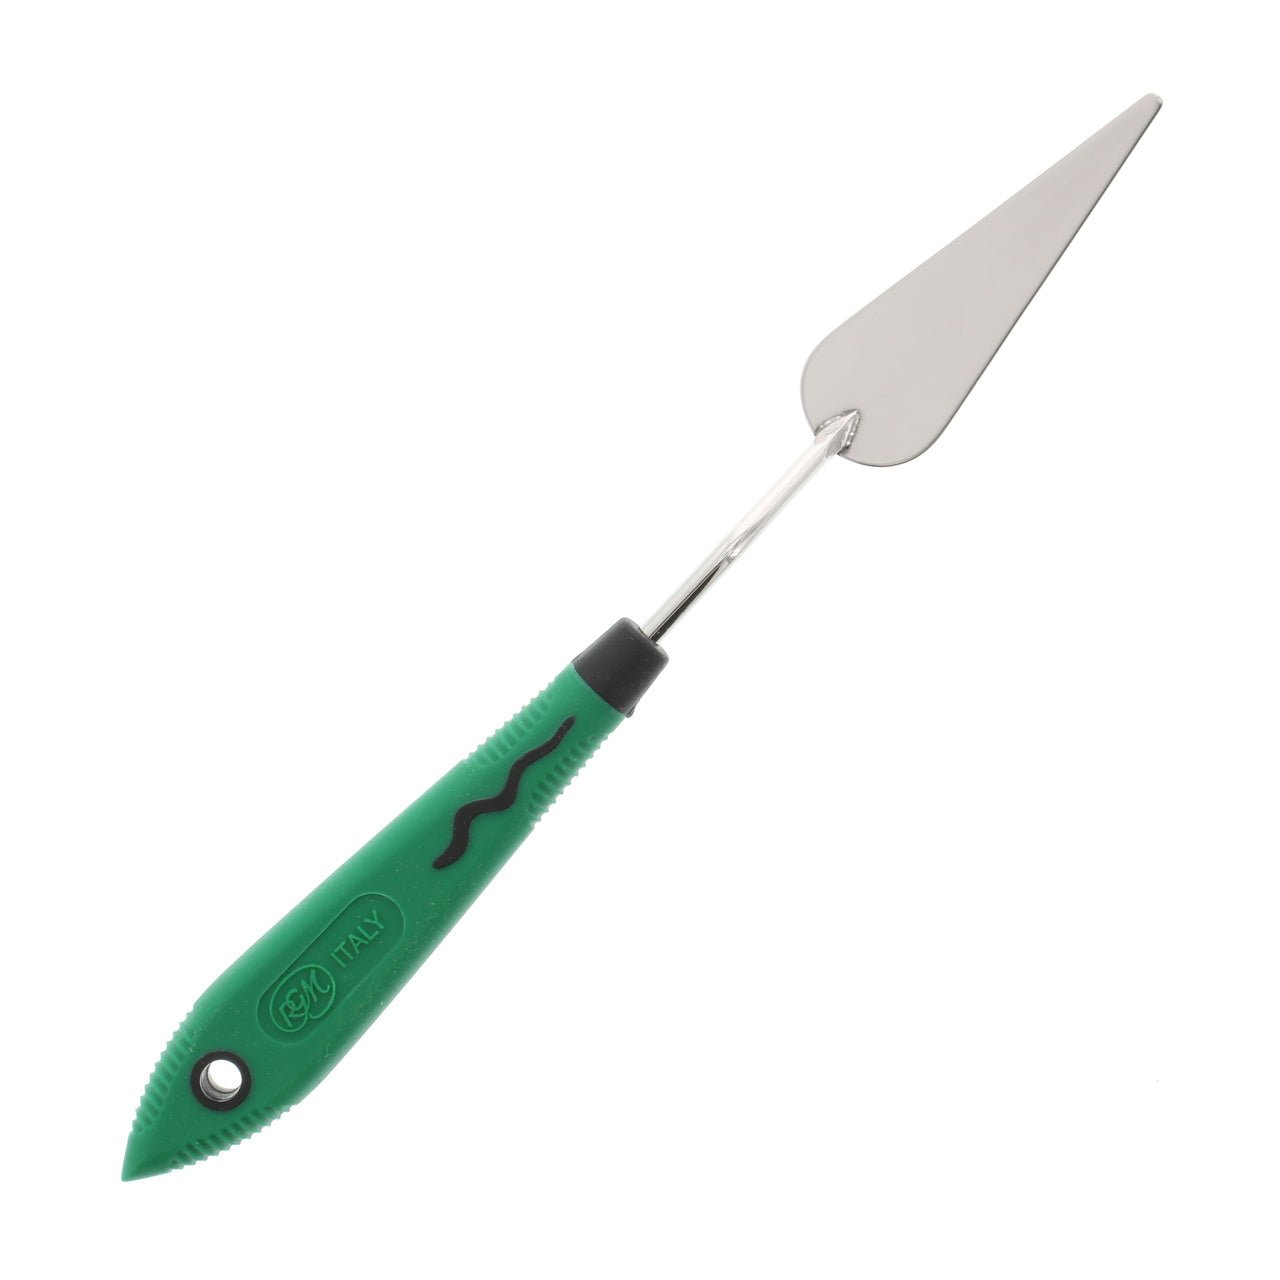 RGM Soft Grip Painting Knife #030 (Green Handle)